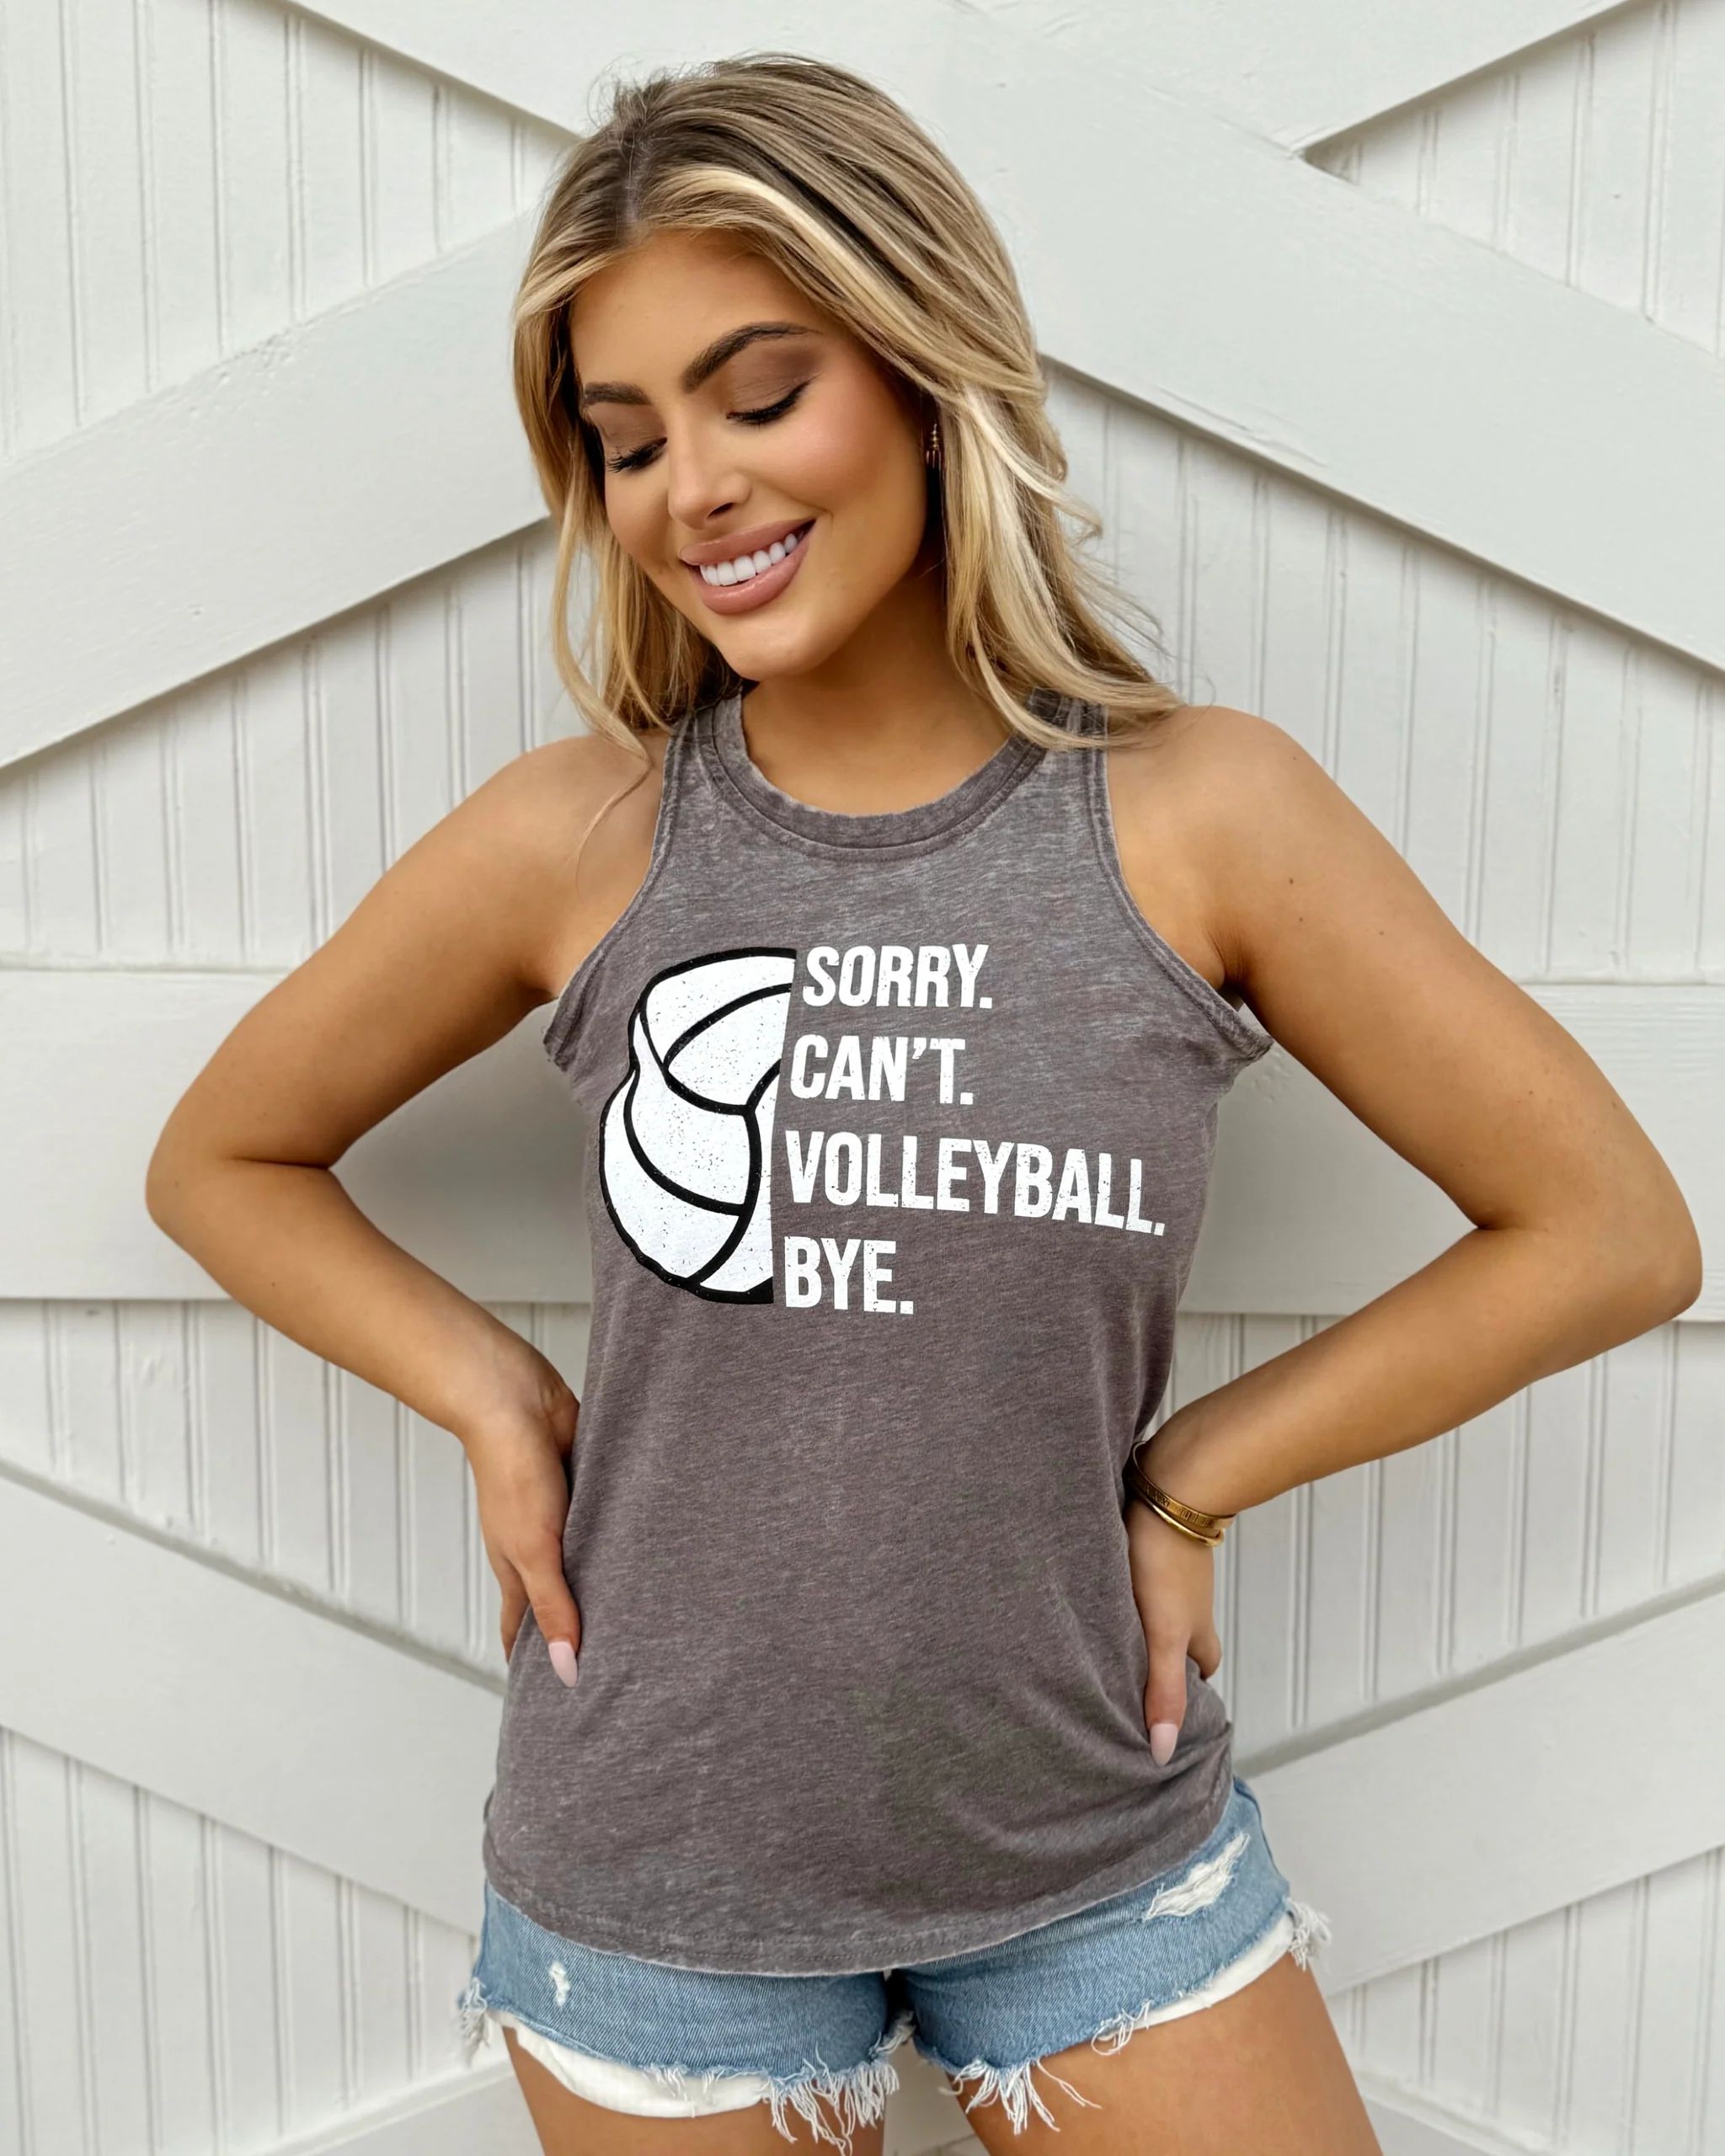 SORRY. CAN’T. VOLLEYBALL. BYE. Flowy Acid-Wash Tank | Live Love Gameday®